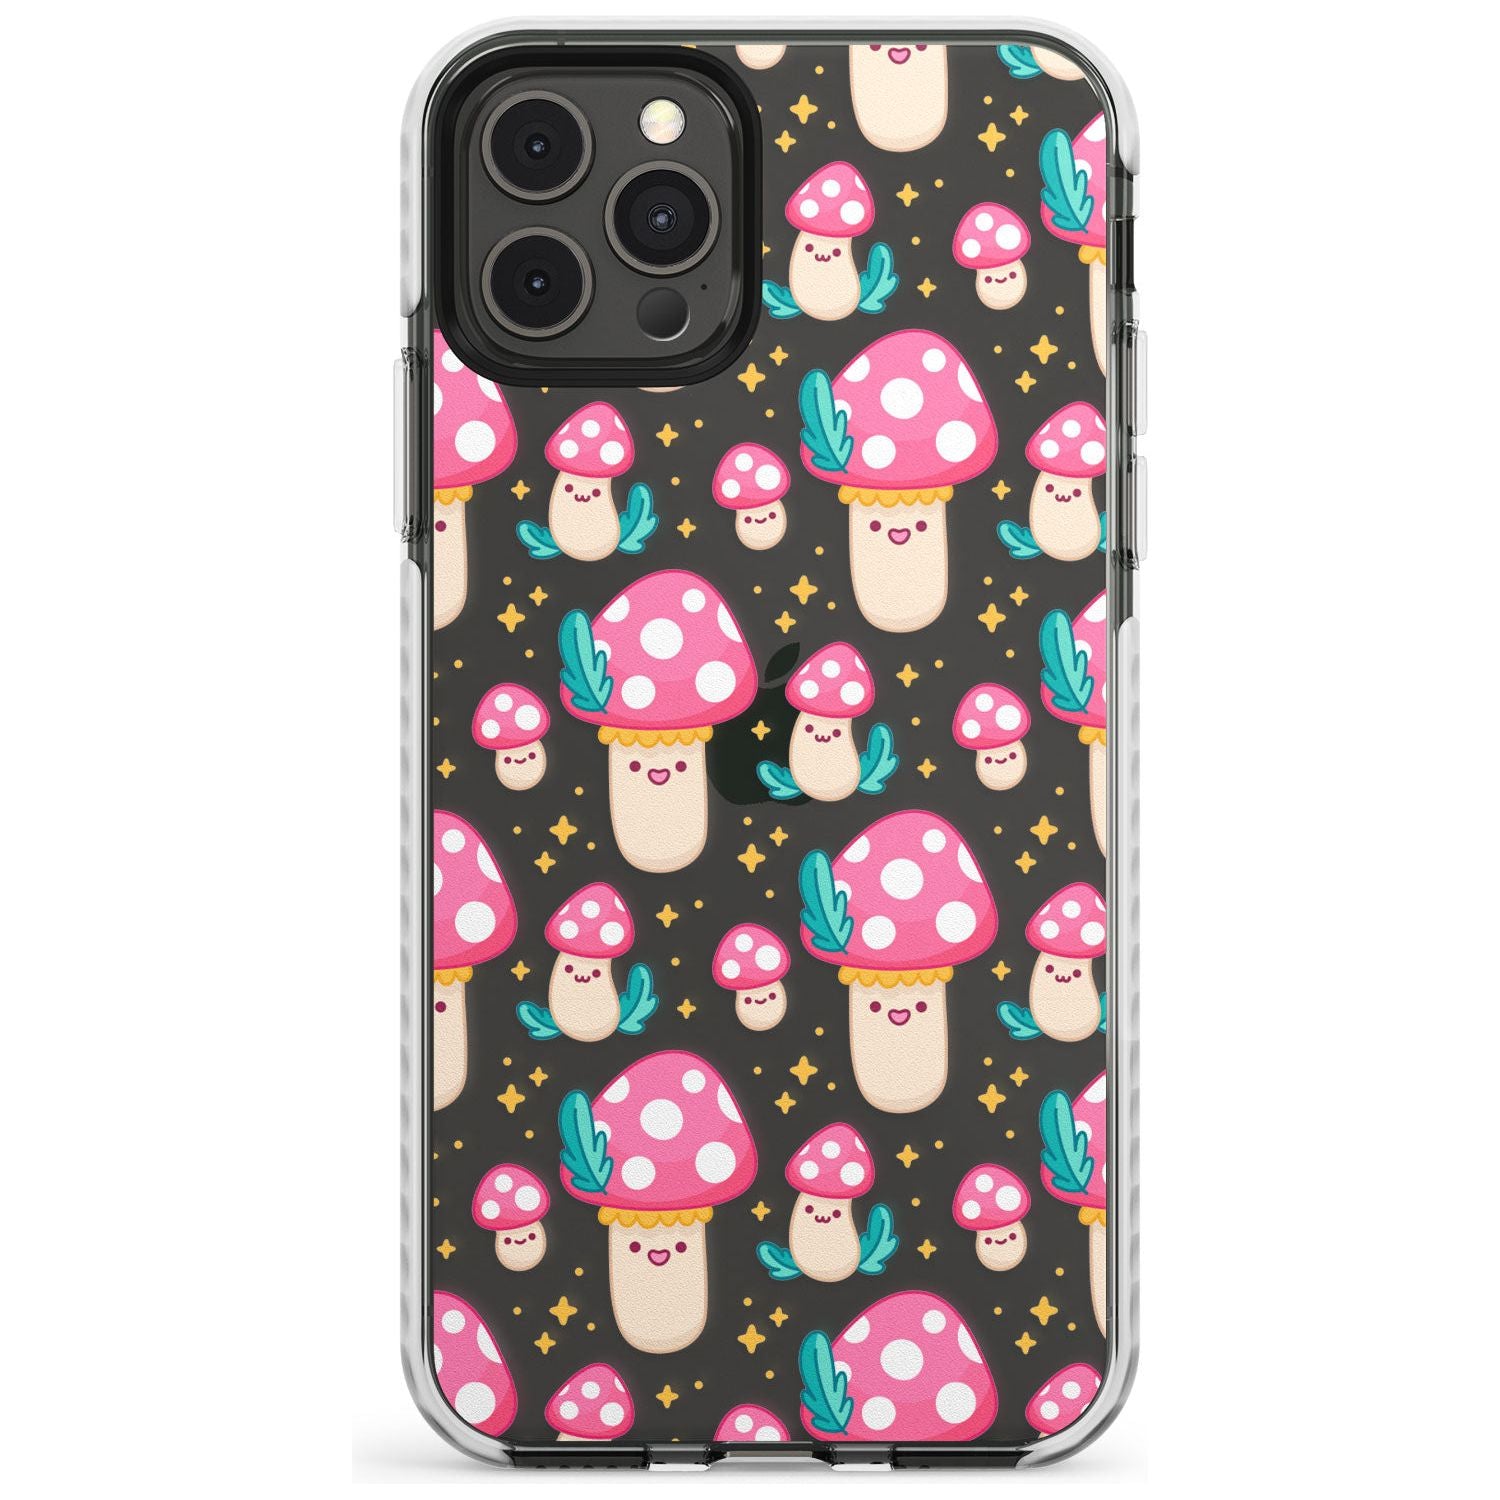 Cute Mushrooms Pattern Impact Phone Case for iPhone 11 Pro Max